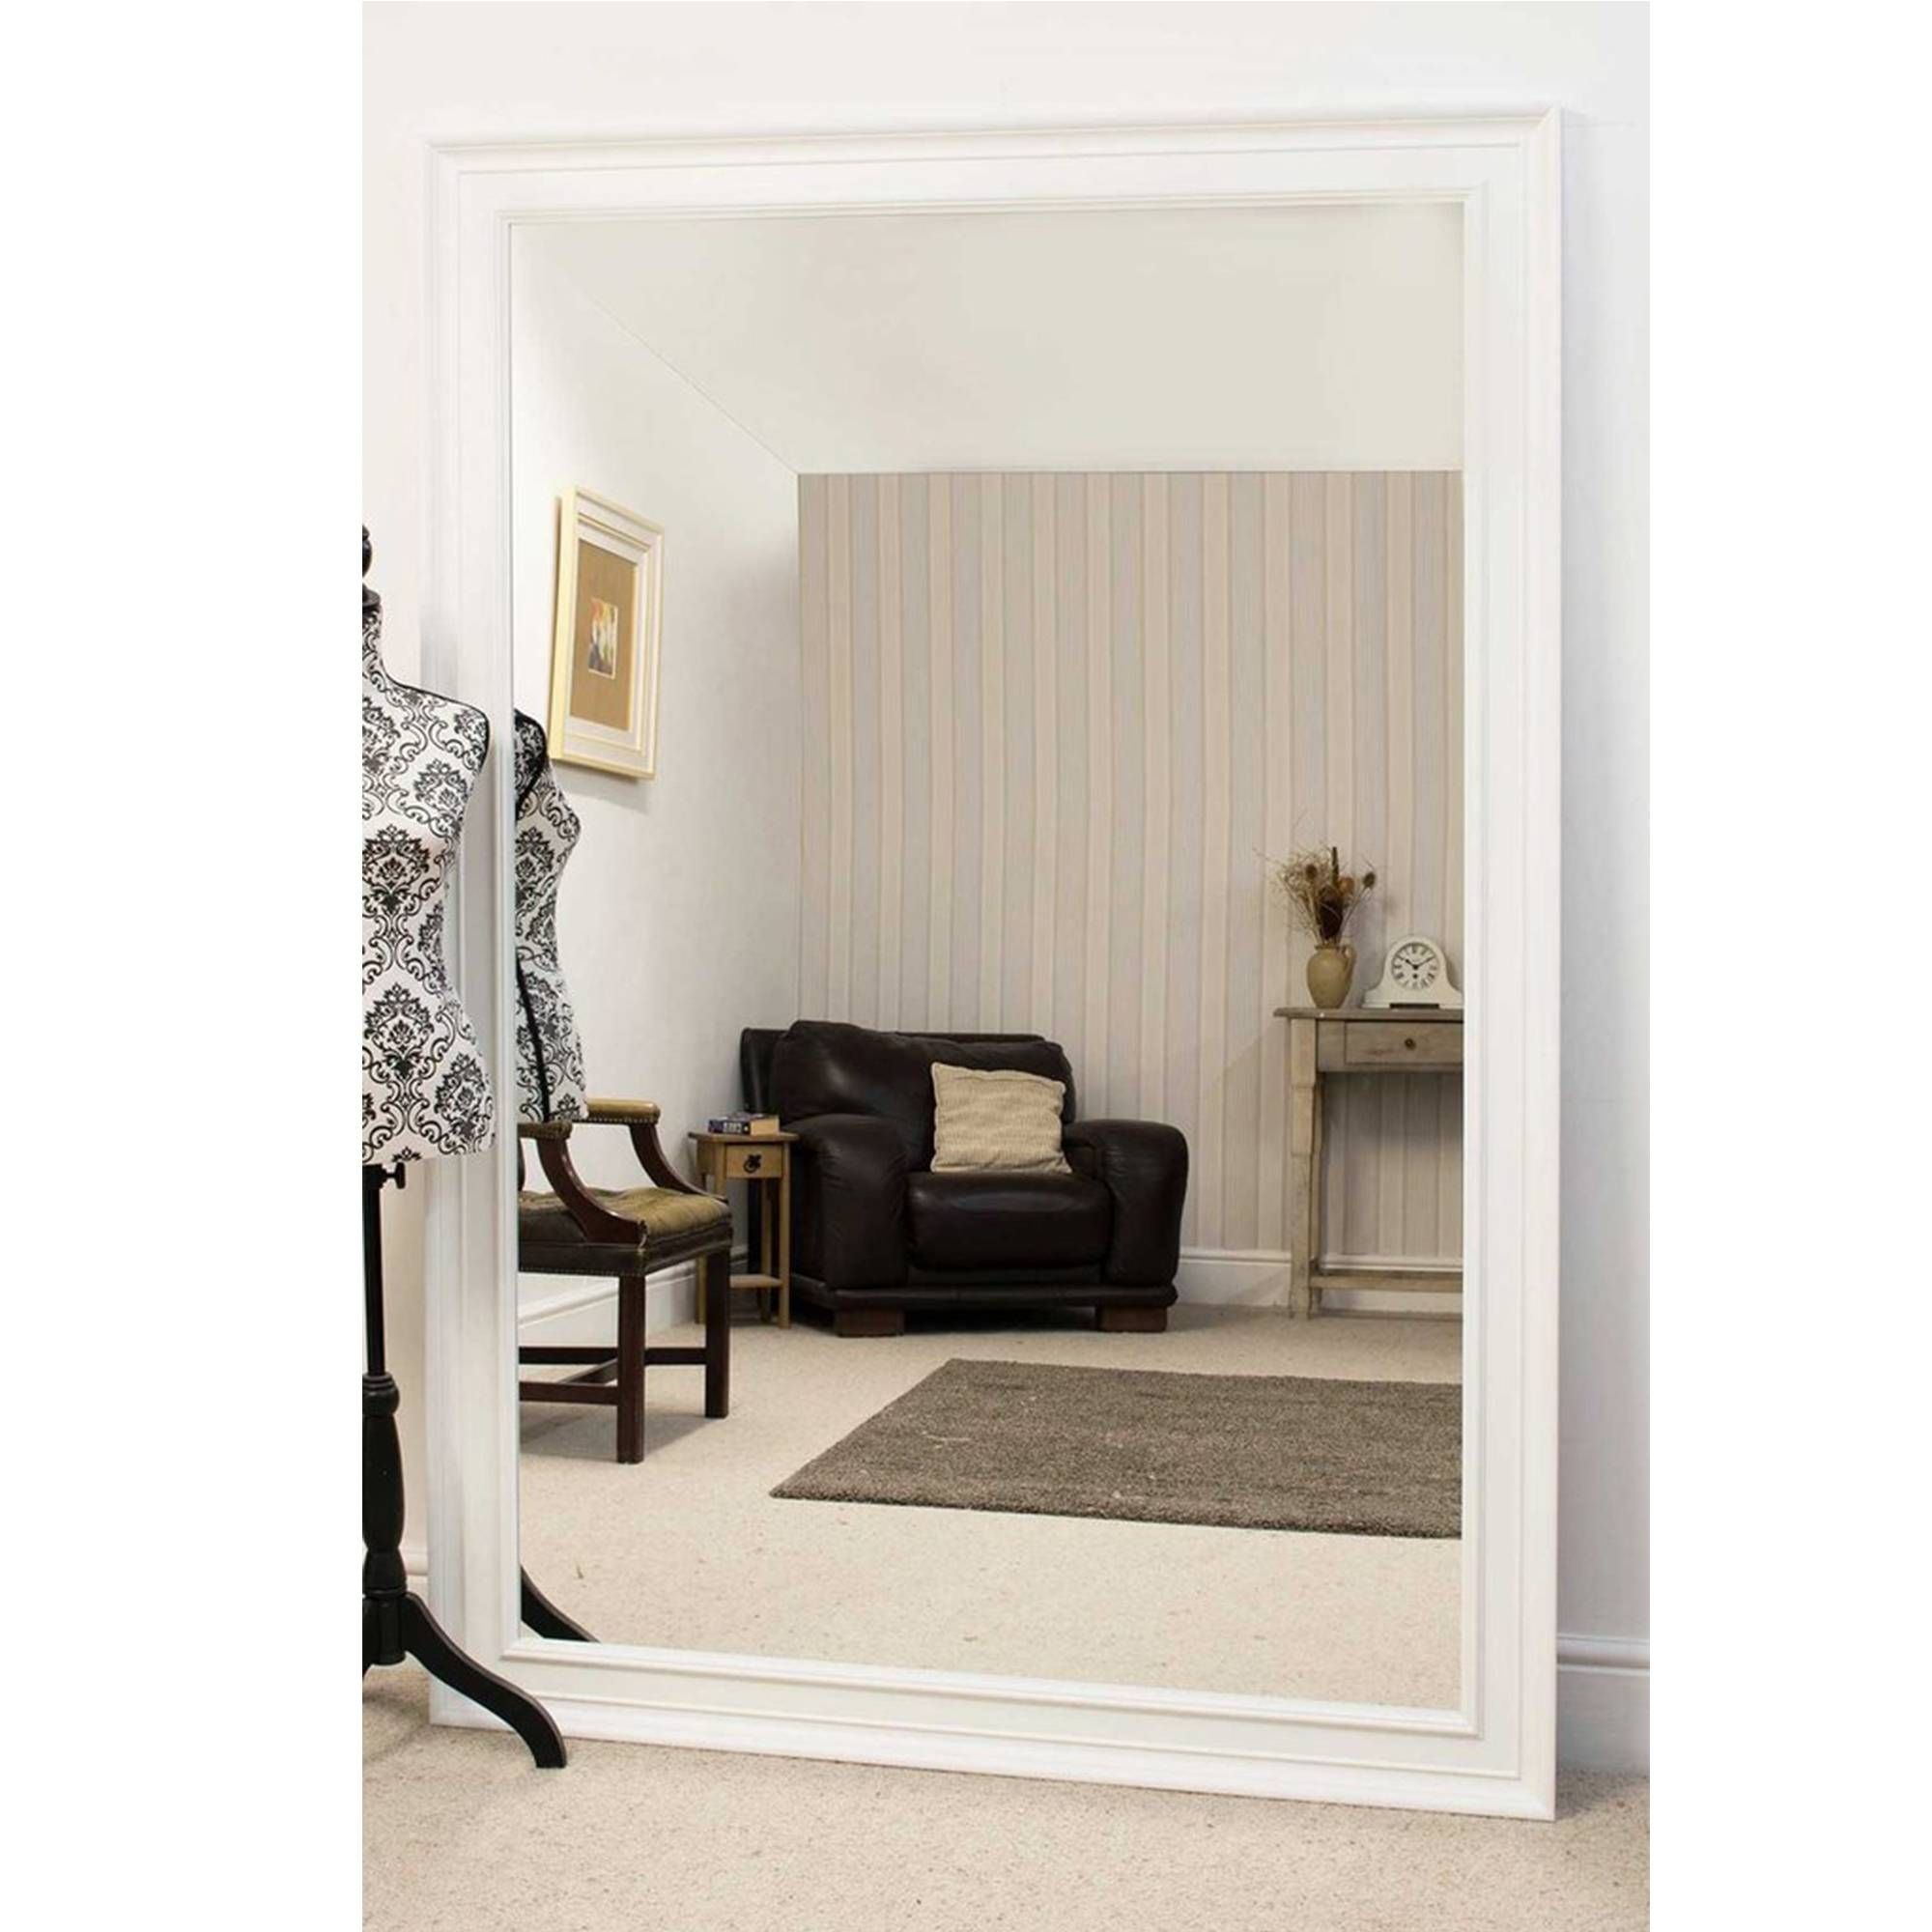 Large White Antique French Style Mirror | Ornate White Mirrors Inside French Style Mirrors (View 15 of 15)